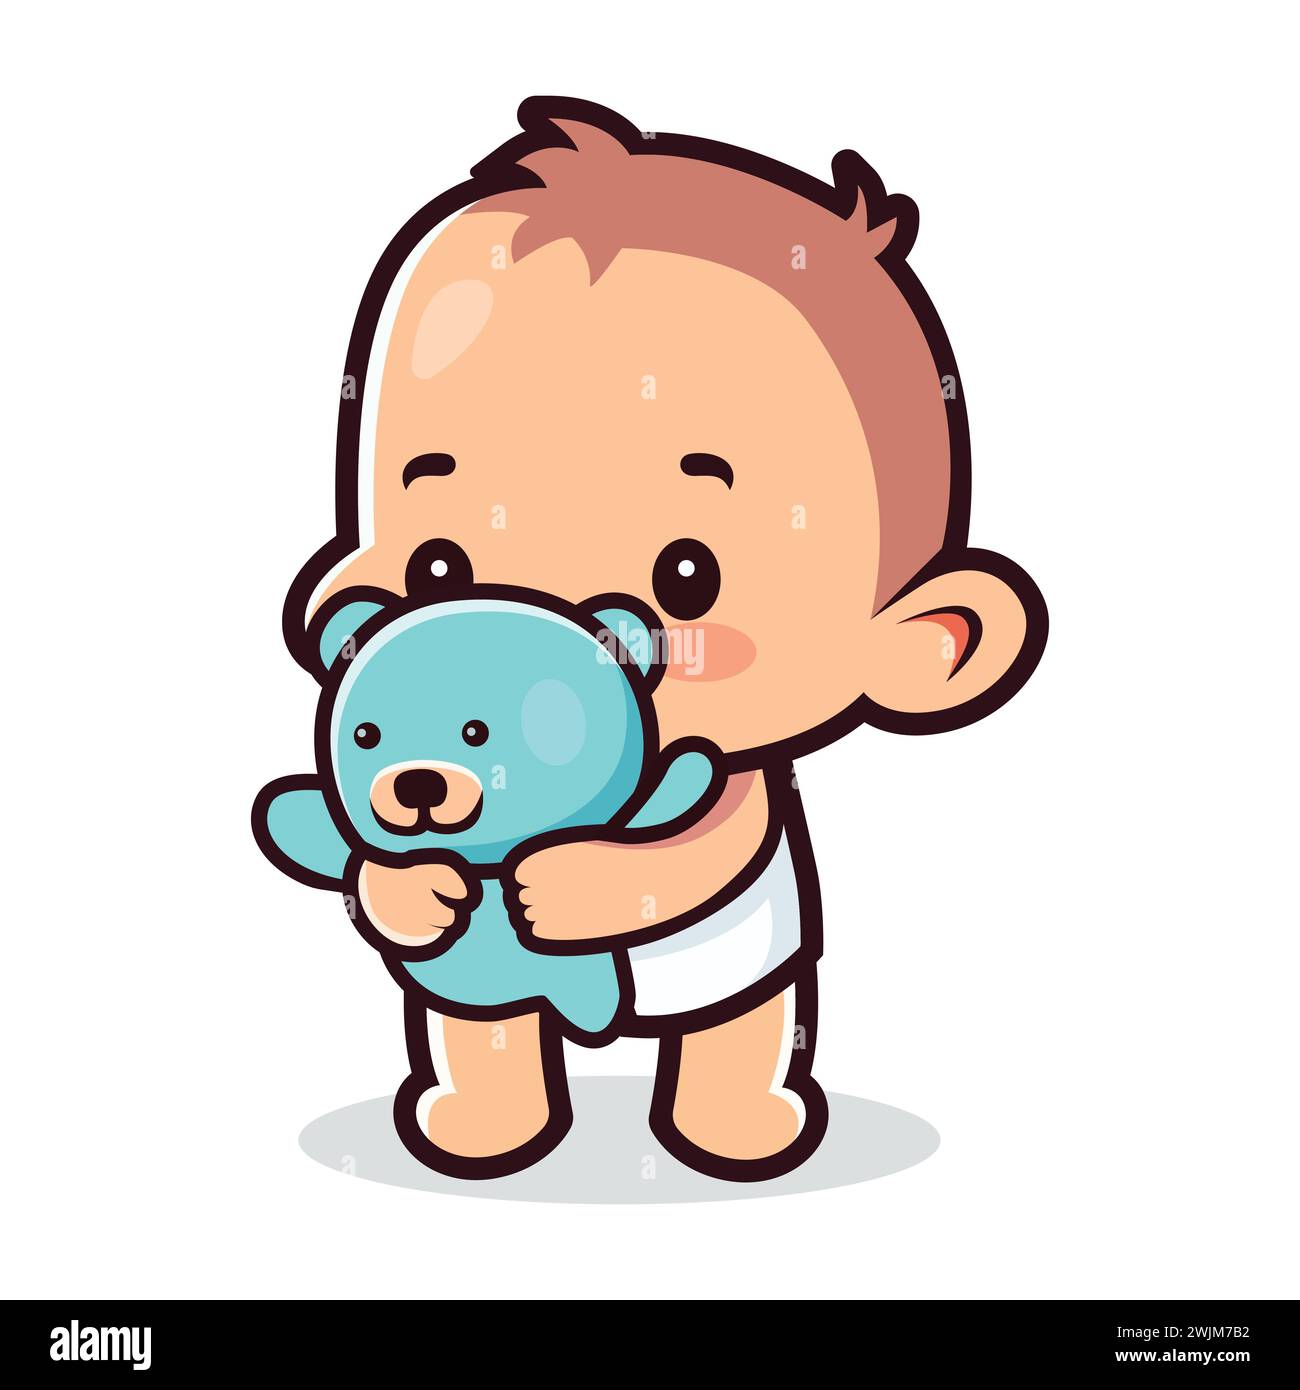 Adorable Cartoon baby character playing with a teddy bear. Isolated baby character vector illustration. Baby icon and symbol for diaper brand social Stock Vector